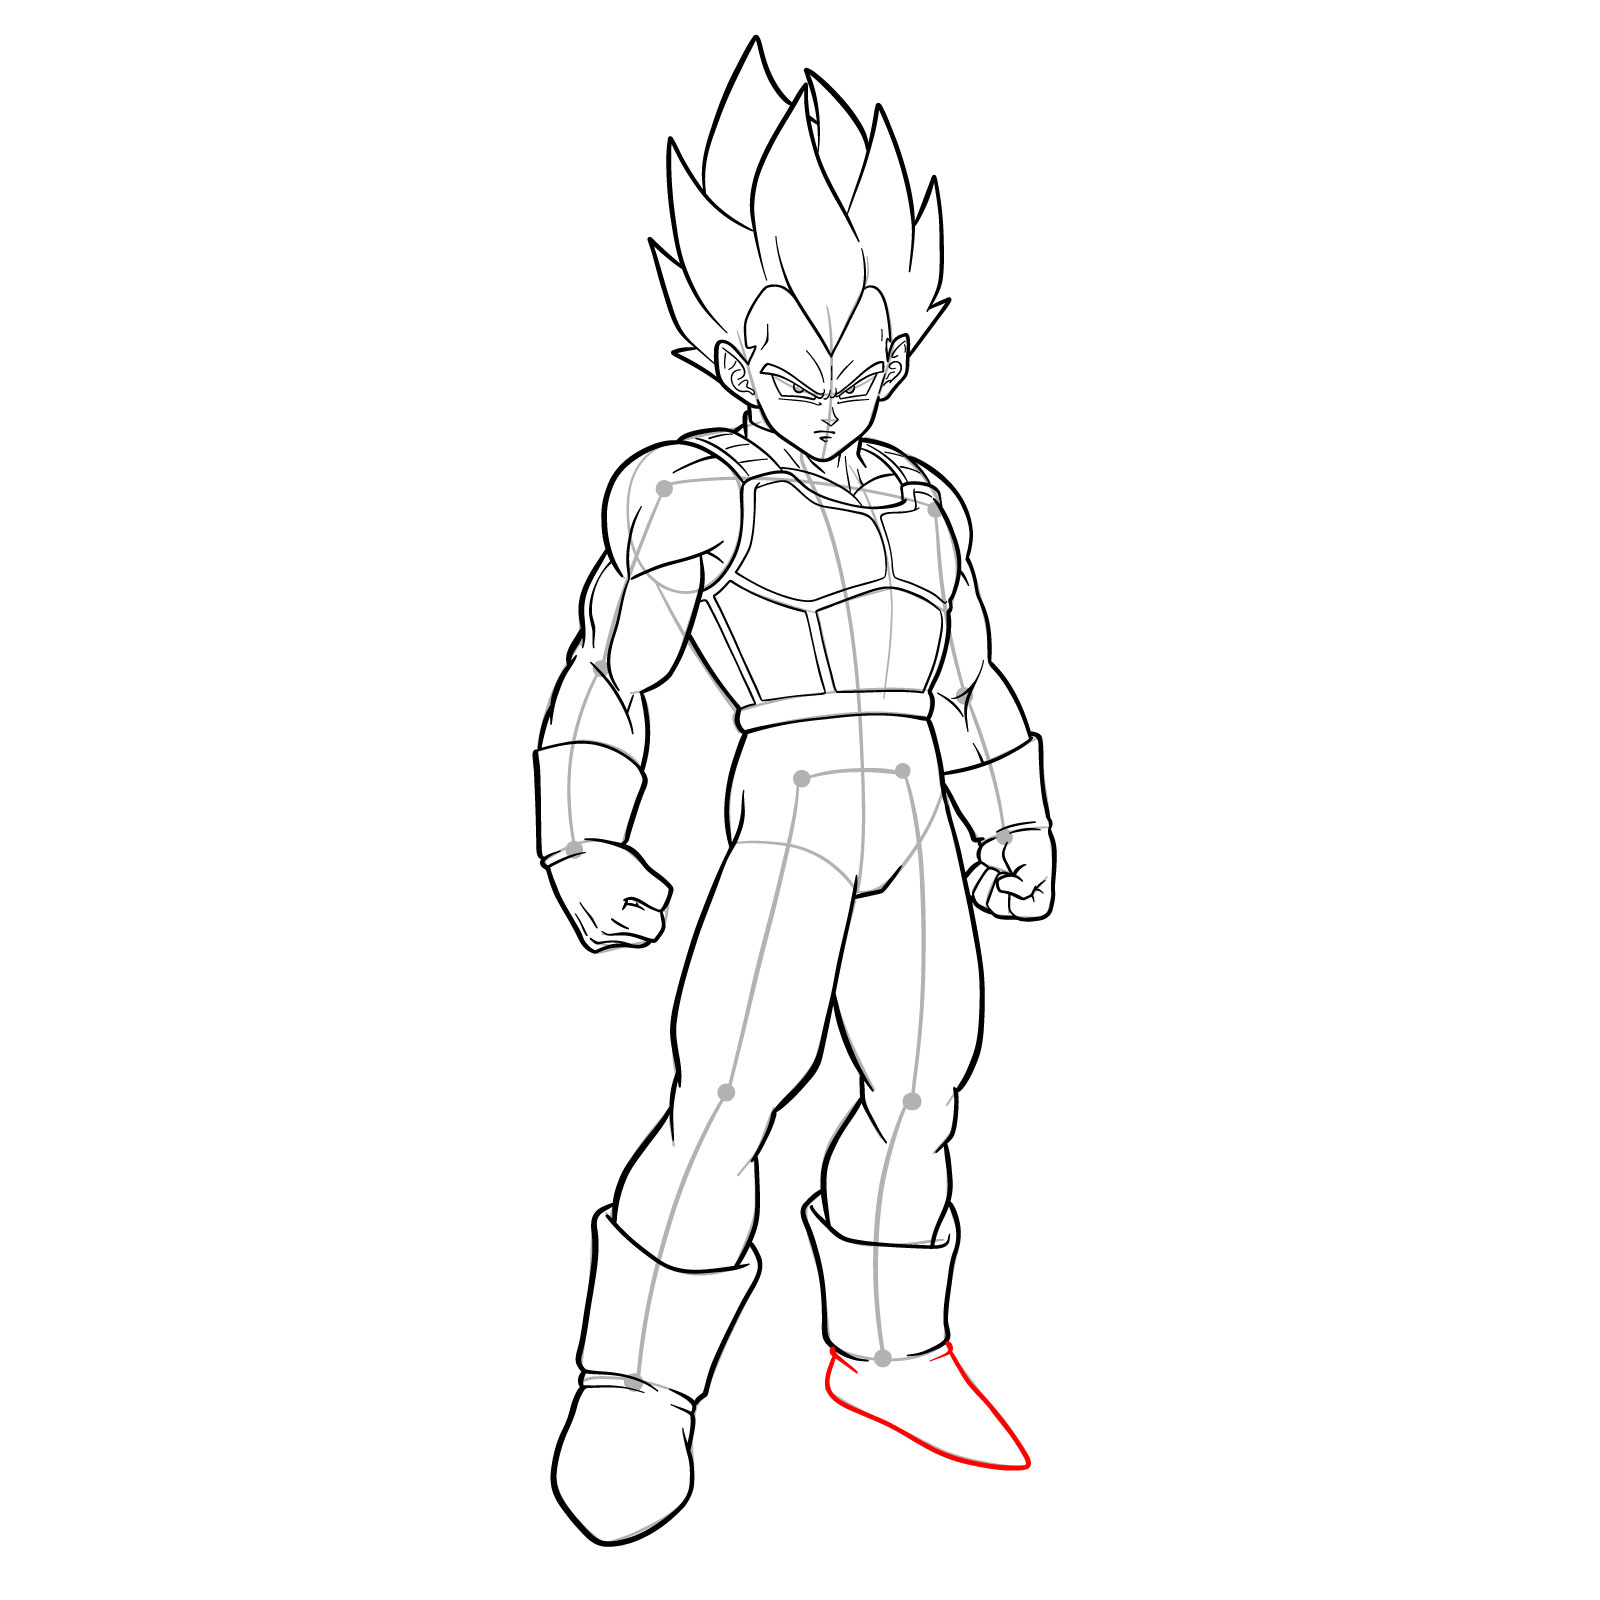 How to draw Vegeta in SSGSS - step 39